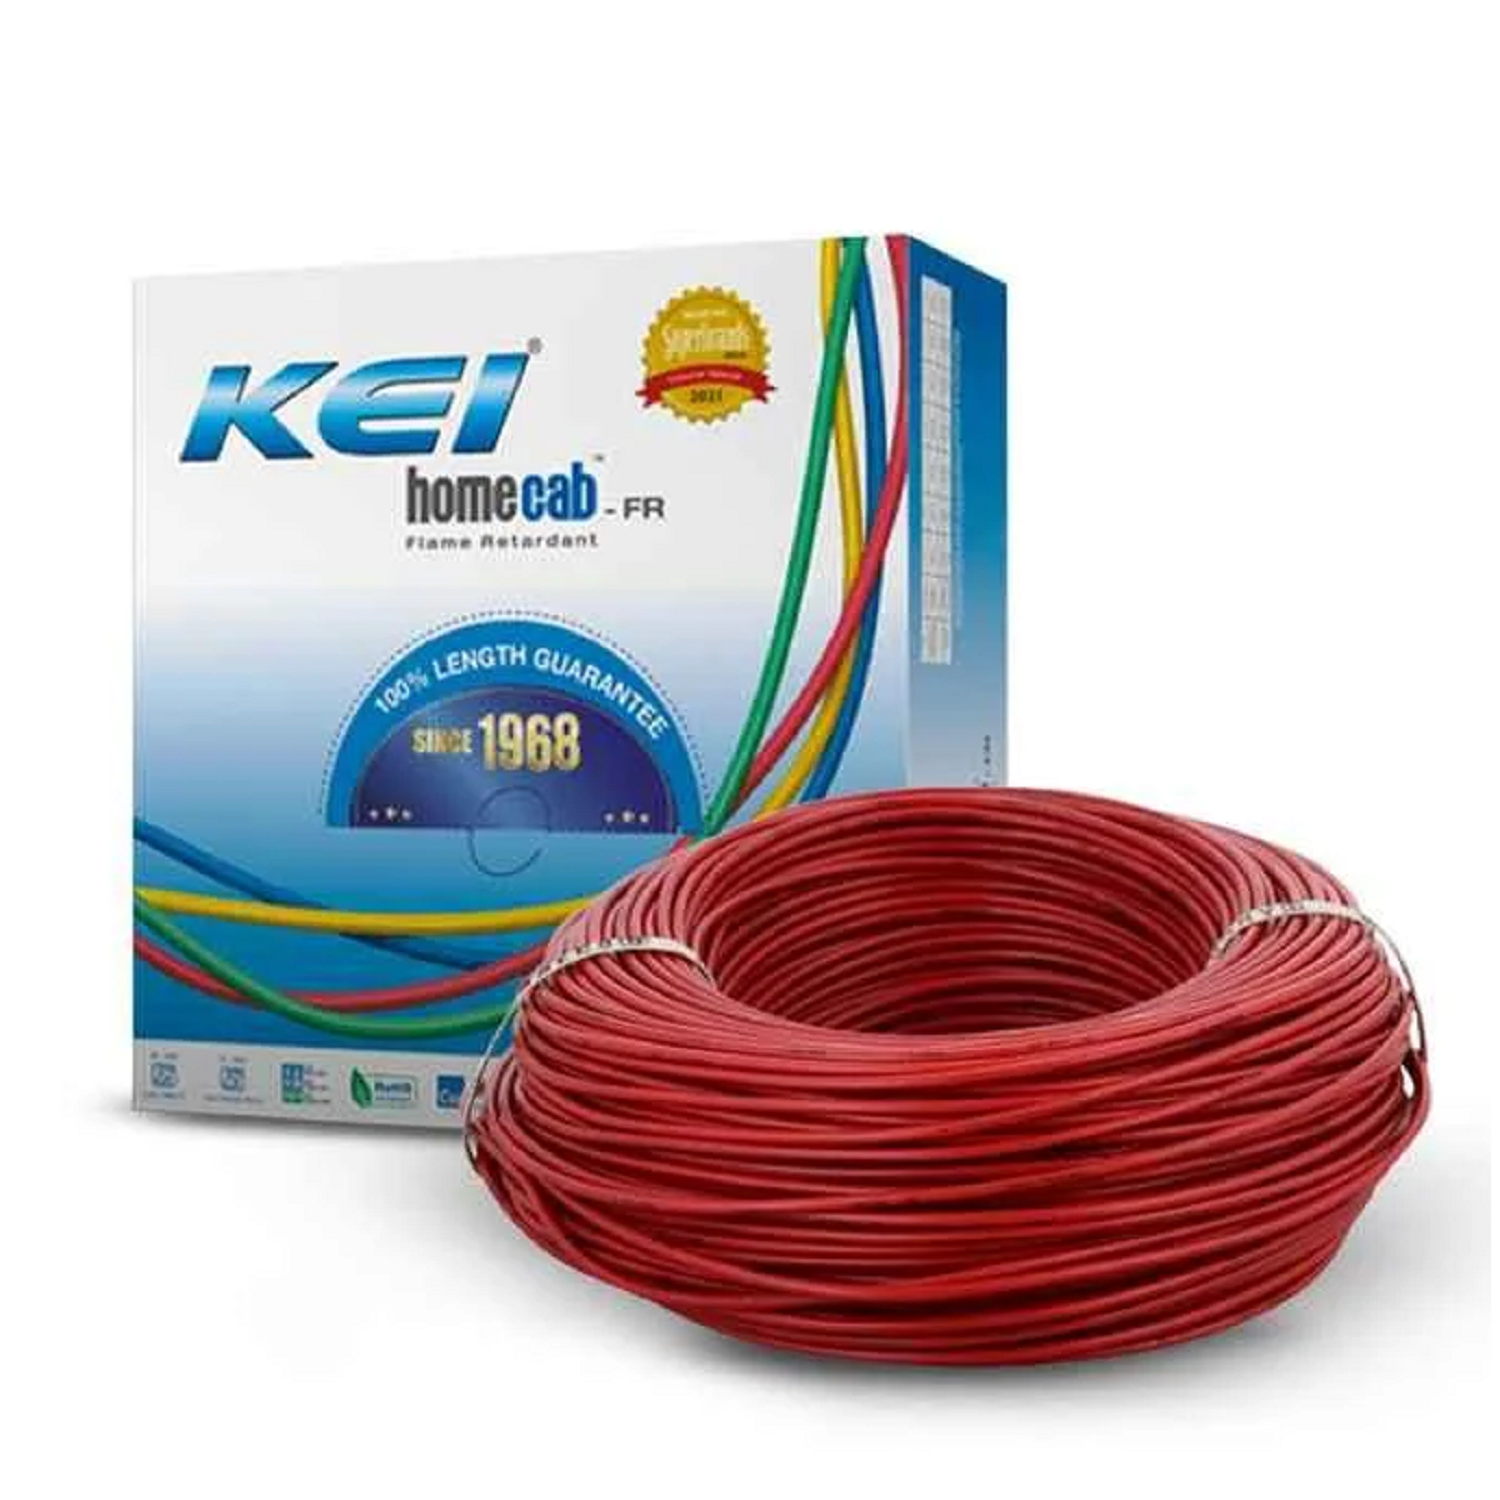 1.0 Sqmm KEI FR Single Core Copper Wire 90 MTR With PVC Insulated for House 38 Industrial (Red)